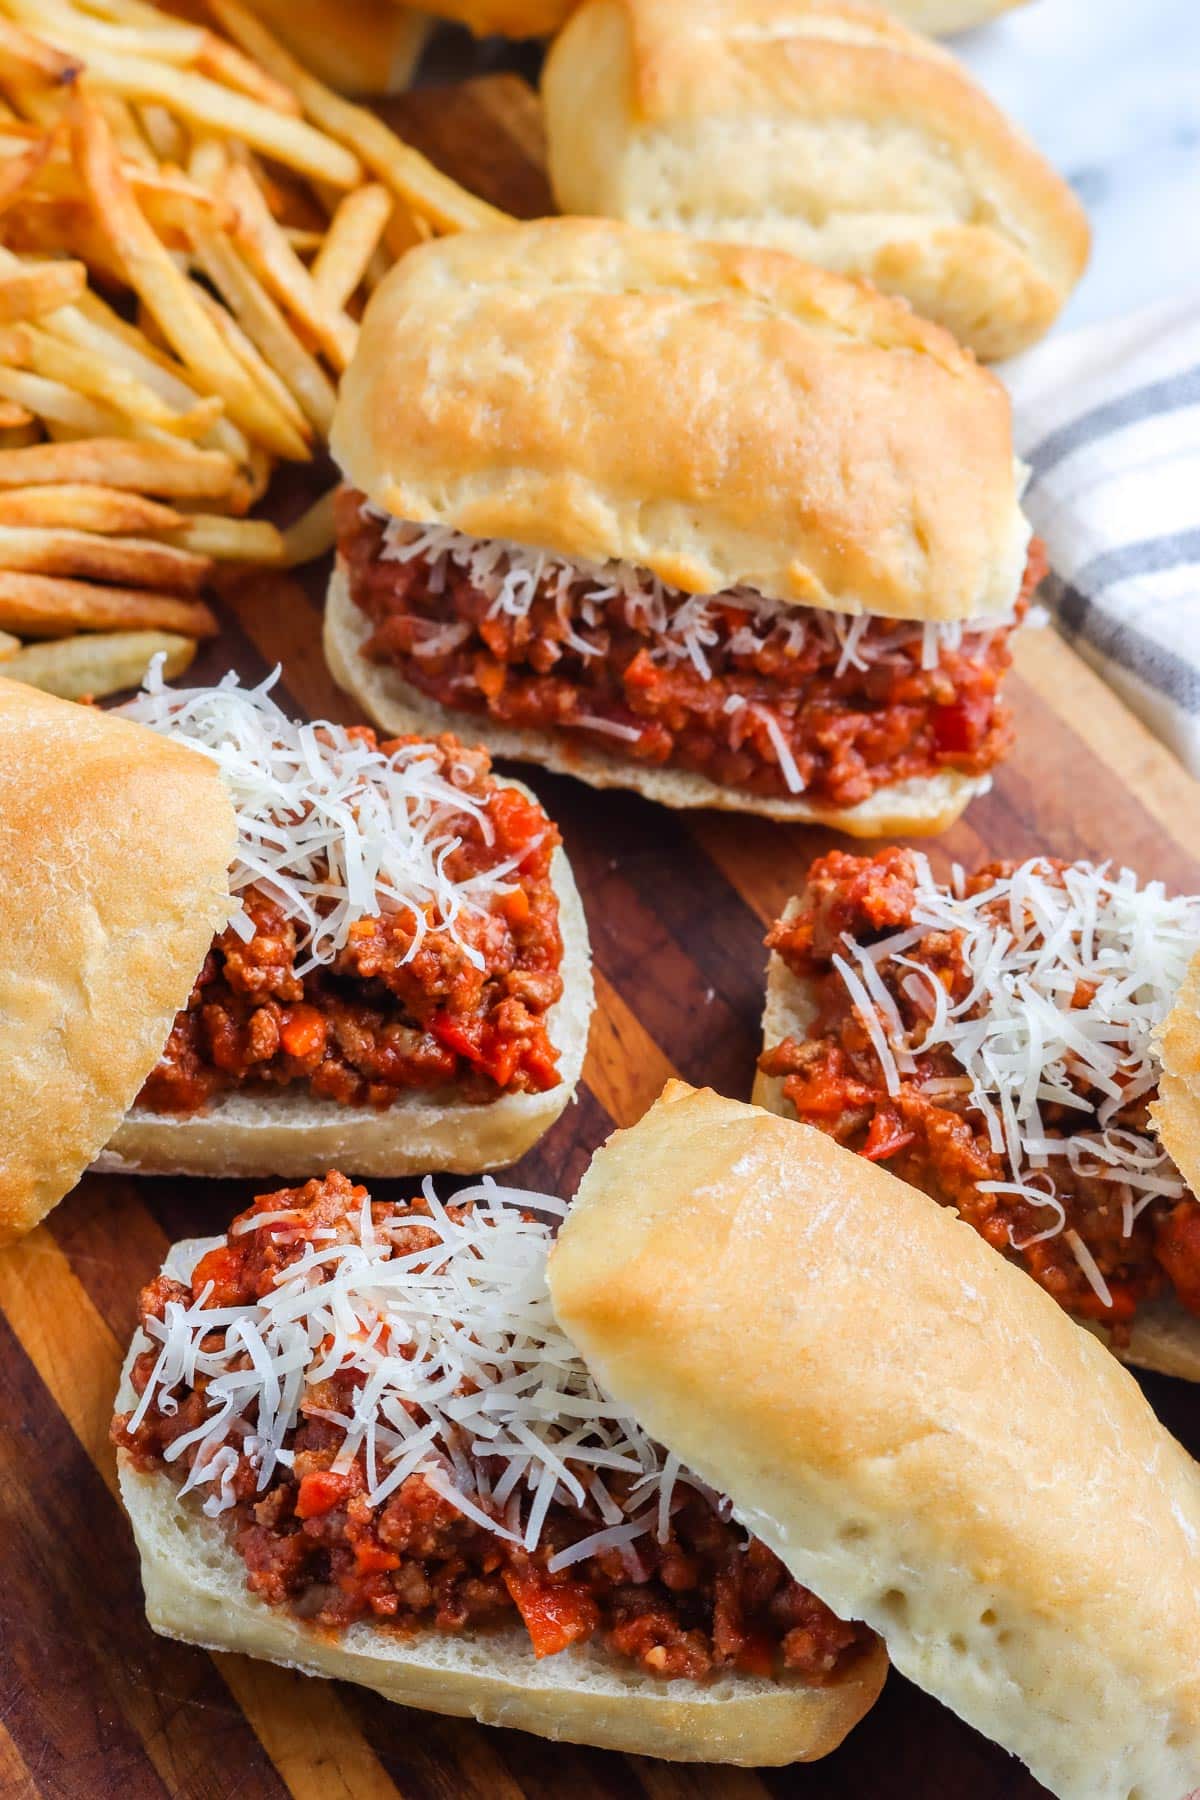 Four sloppy joes on a serving board.